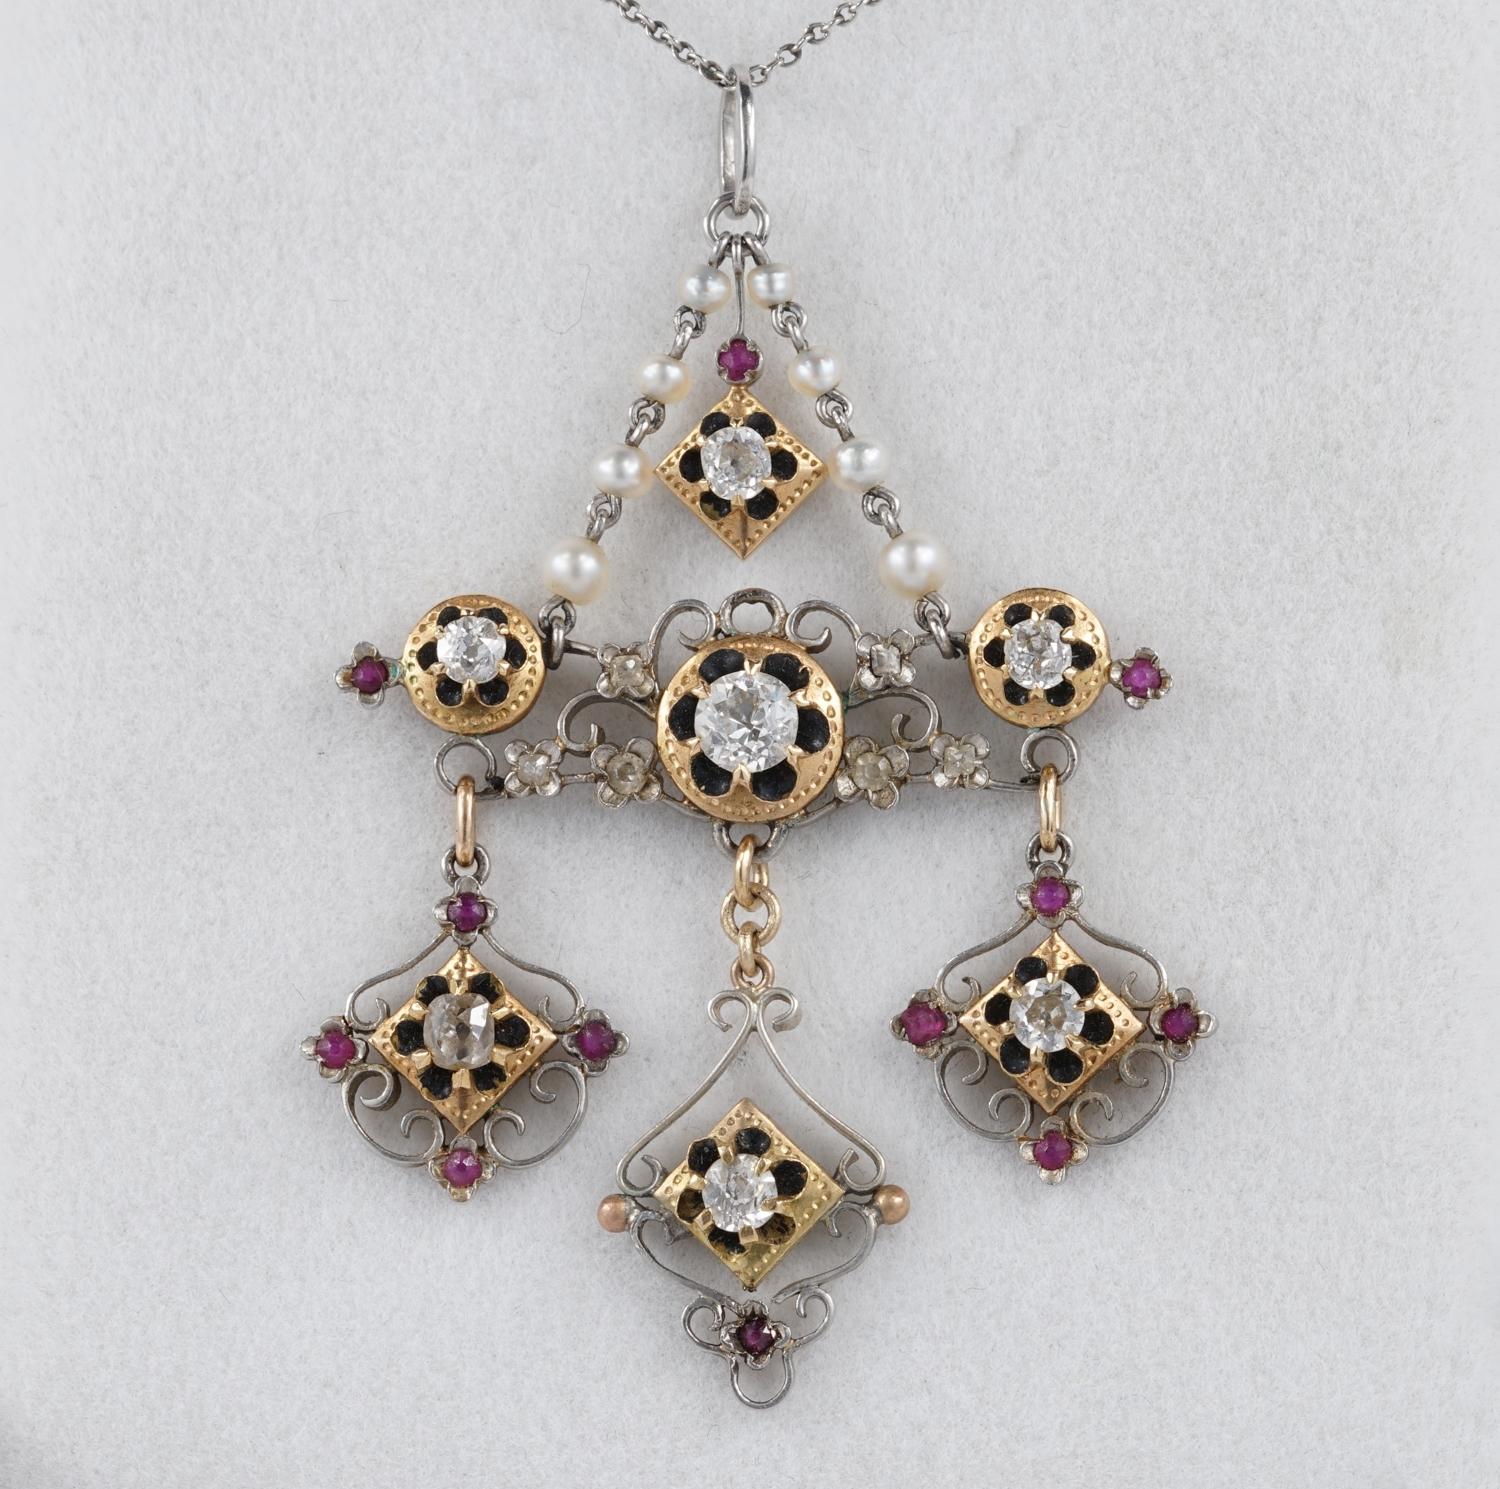 This beautiful Renaissance revival Holbeinesque necklace is 1890 ca
Artful hand made of solid 18 Kt gold, platinum portions
Holbeinesque Renaissance jewellery was rediscovered by Victorian jewellers and their patrons, reviving a fashion that